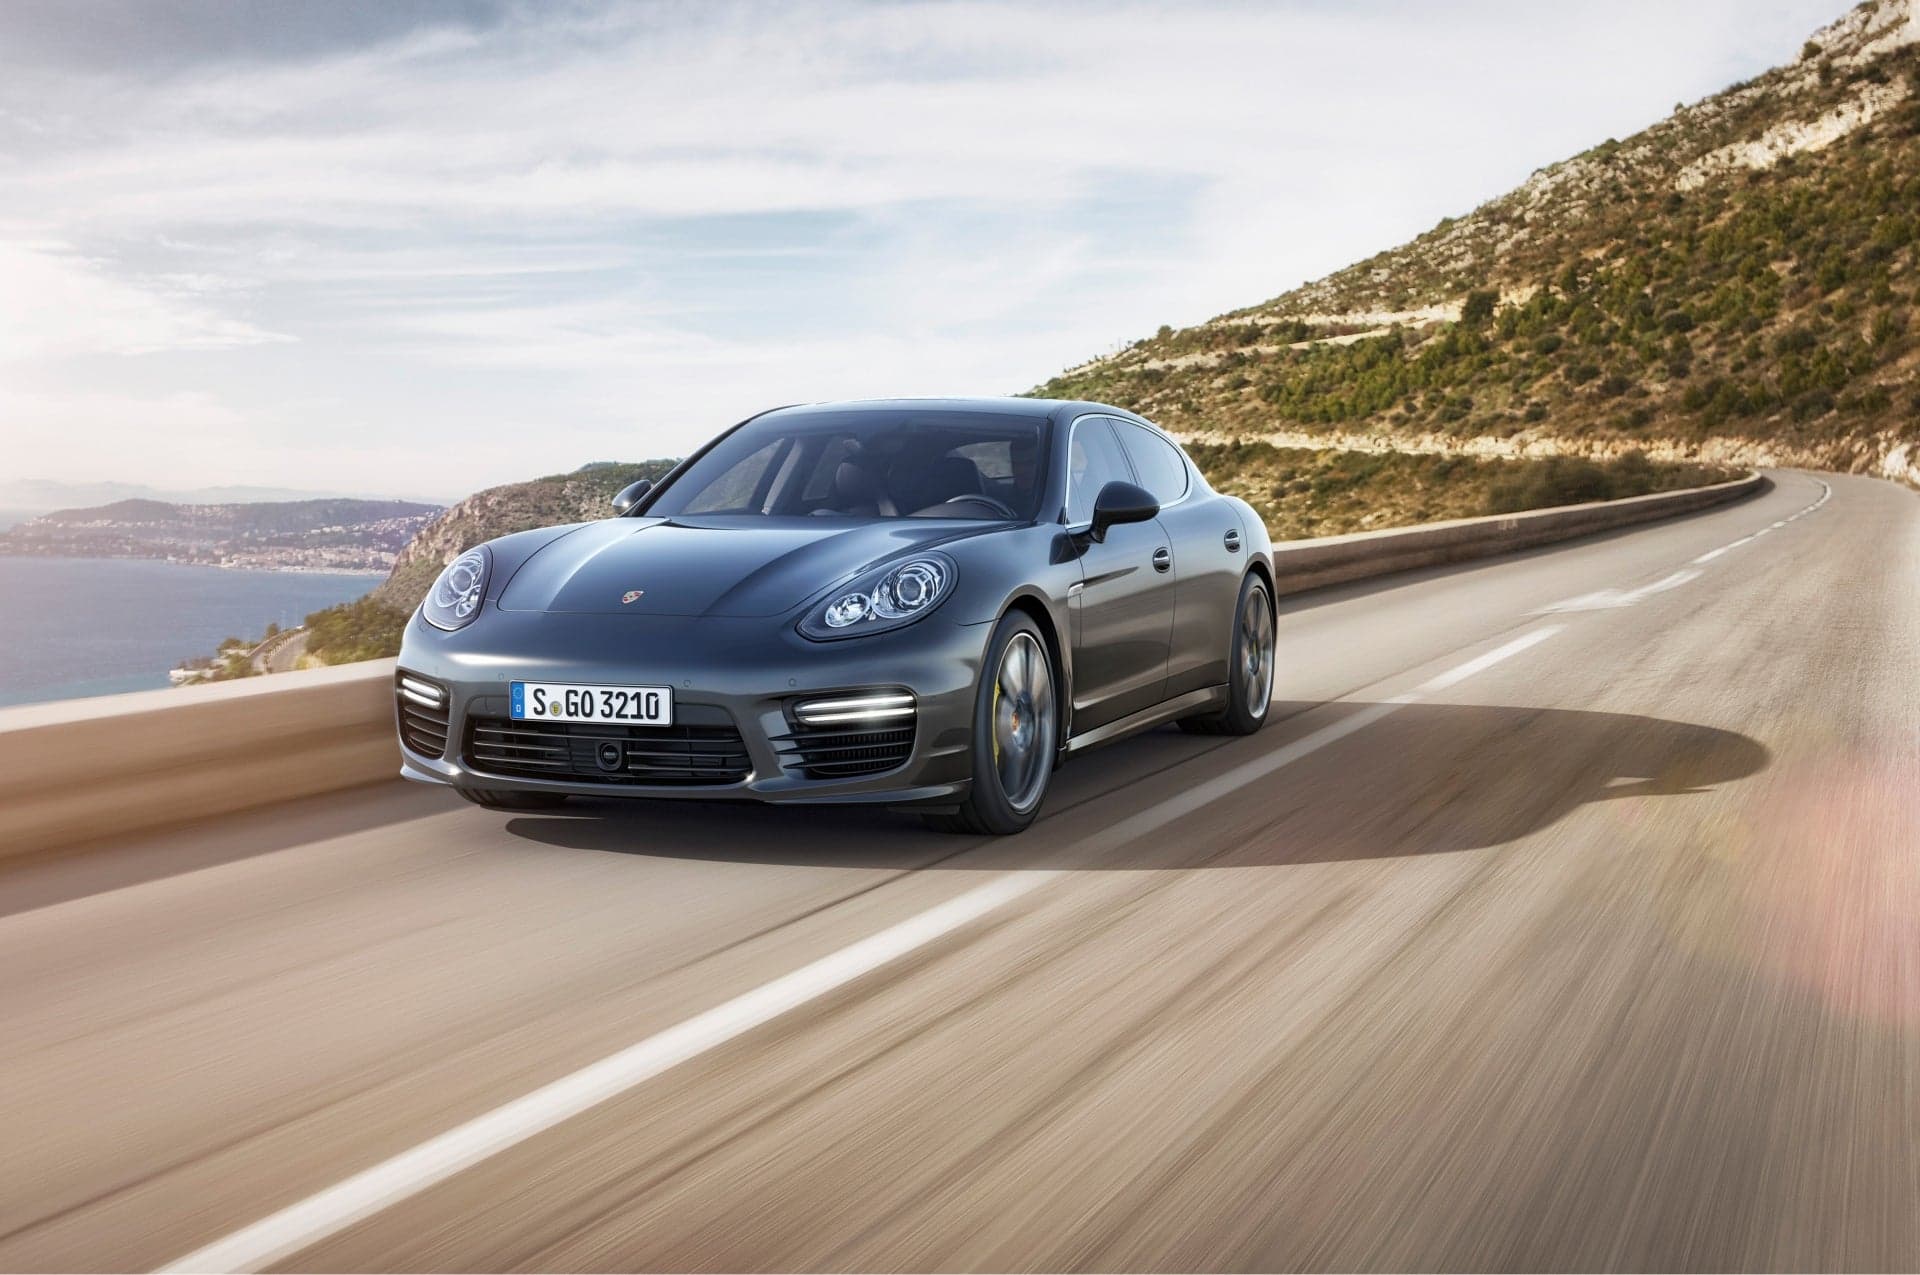 Porsche Recalls Select 2017 and 2018 Panamera Models, Puts Sales on Hold